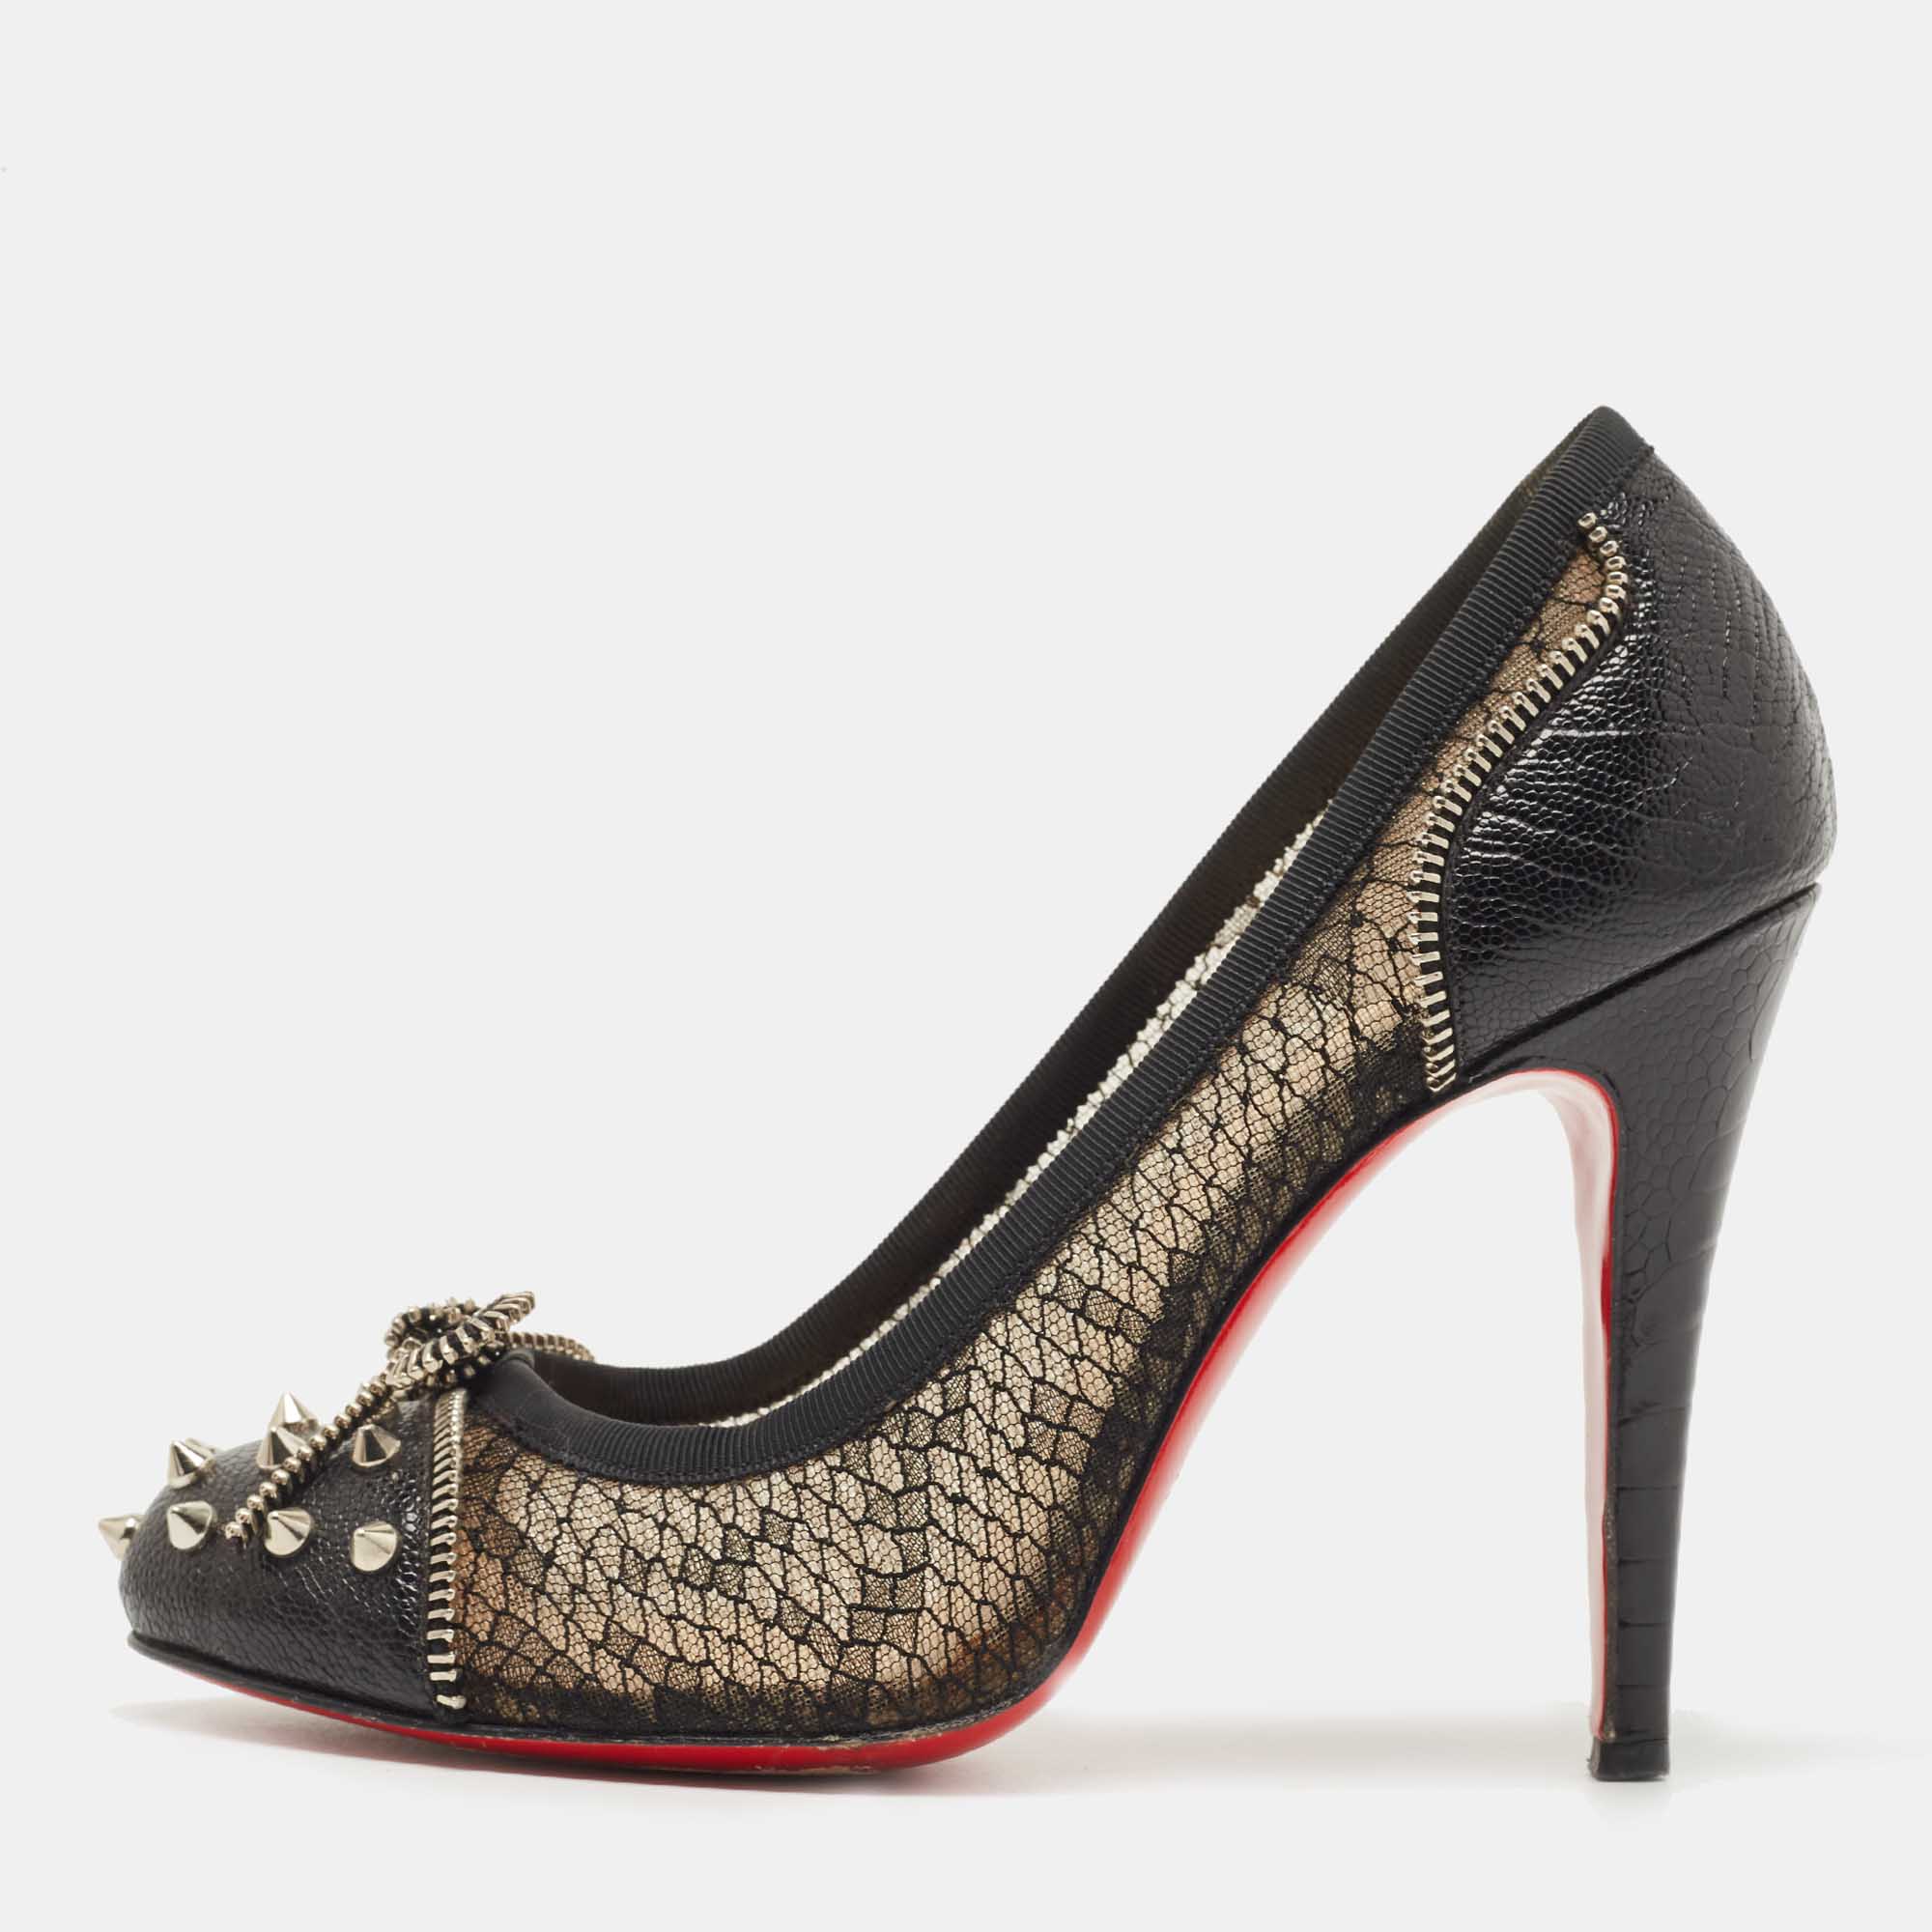 Pre-owned Christian Louboutin Black Leather And Lace Candy Spiked Pumps Size 38